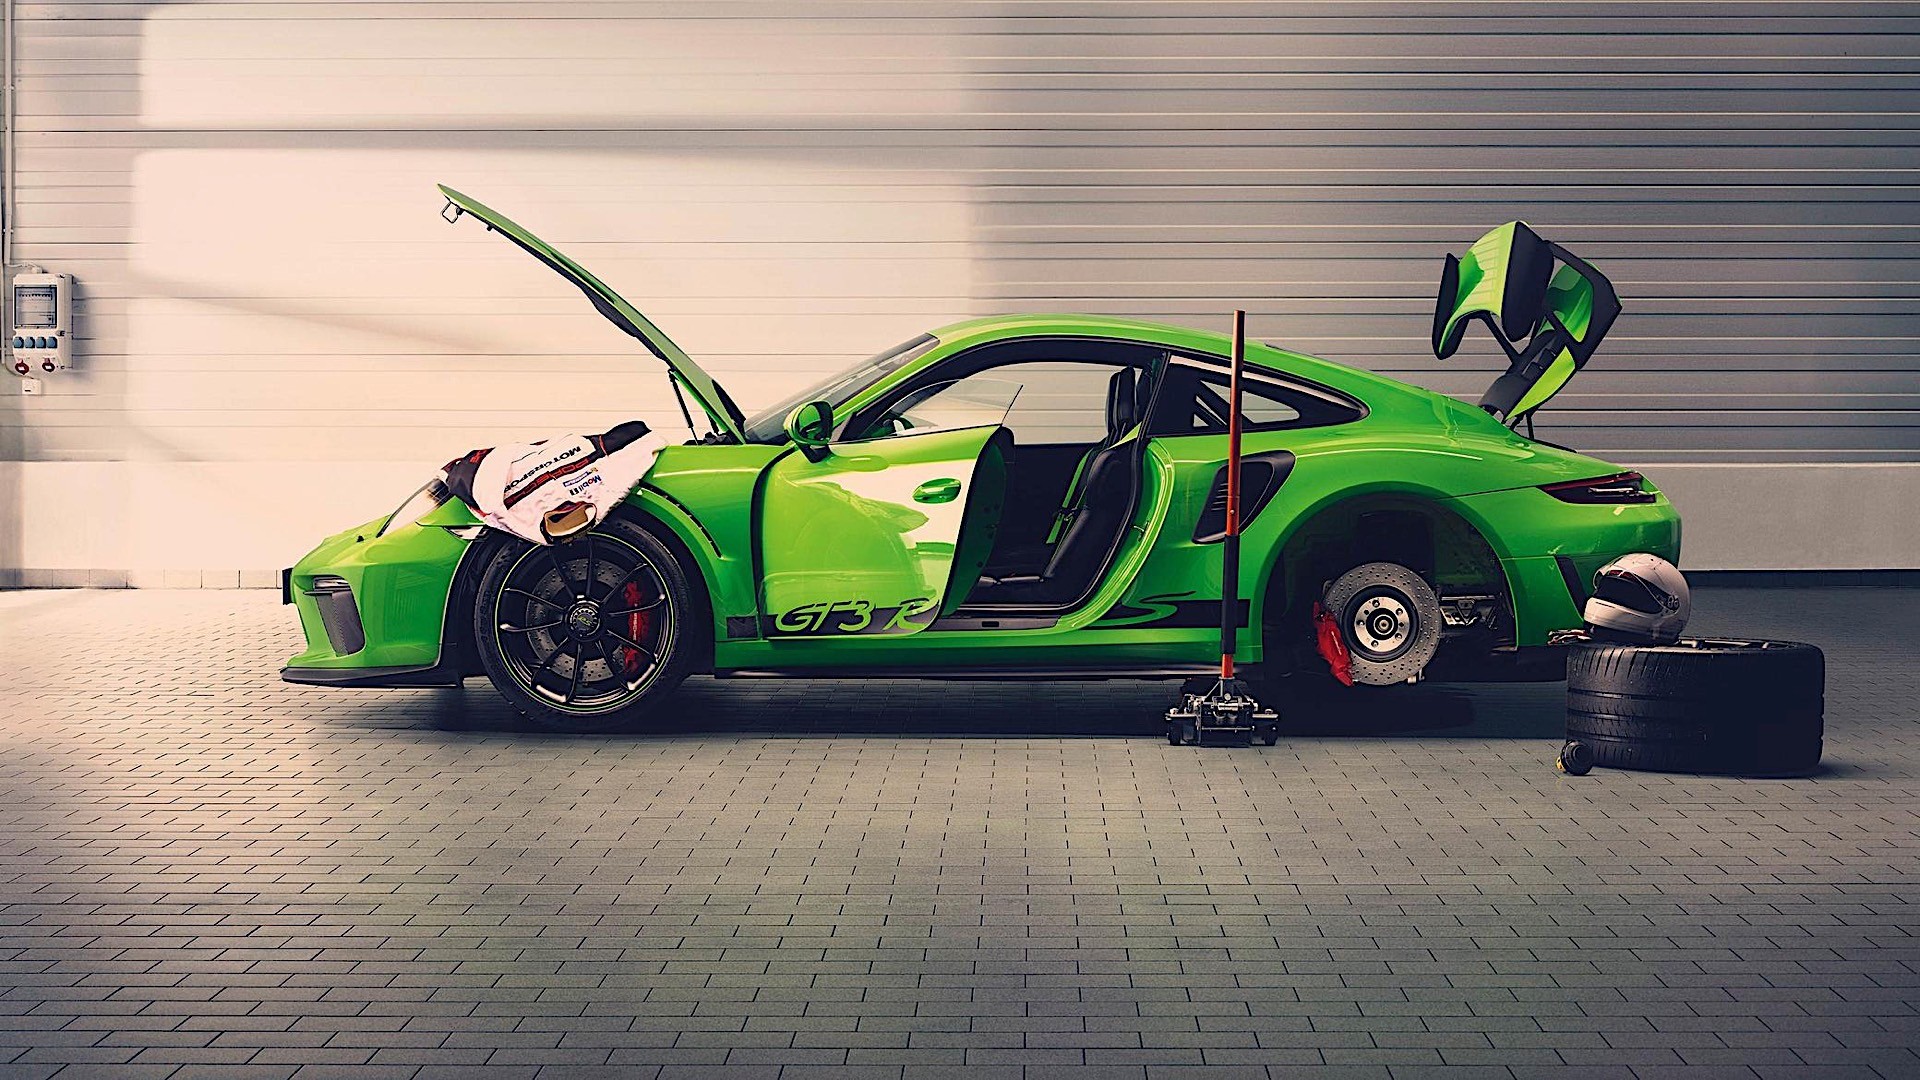 Lime Green [Porsche 911 GT3 RS] 991.2 : r/spotted